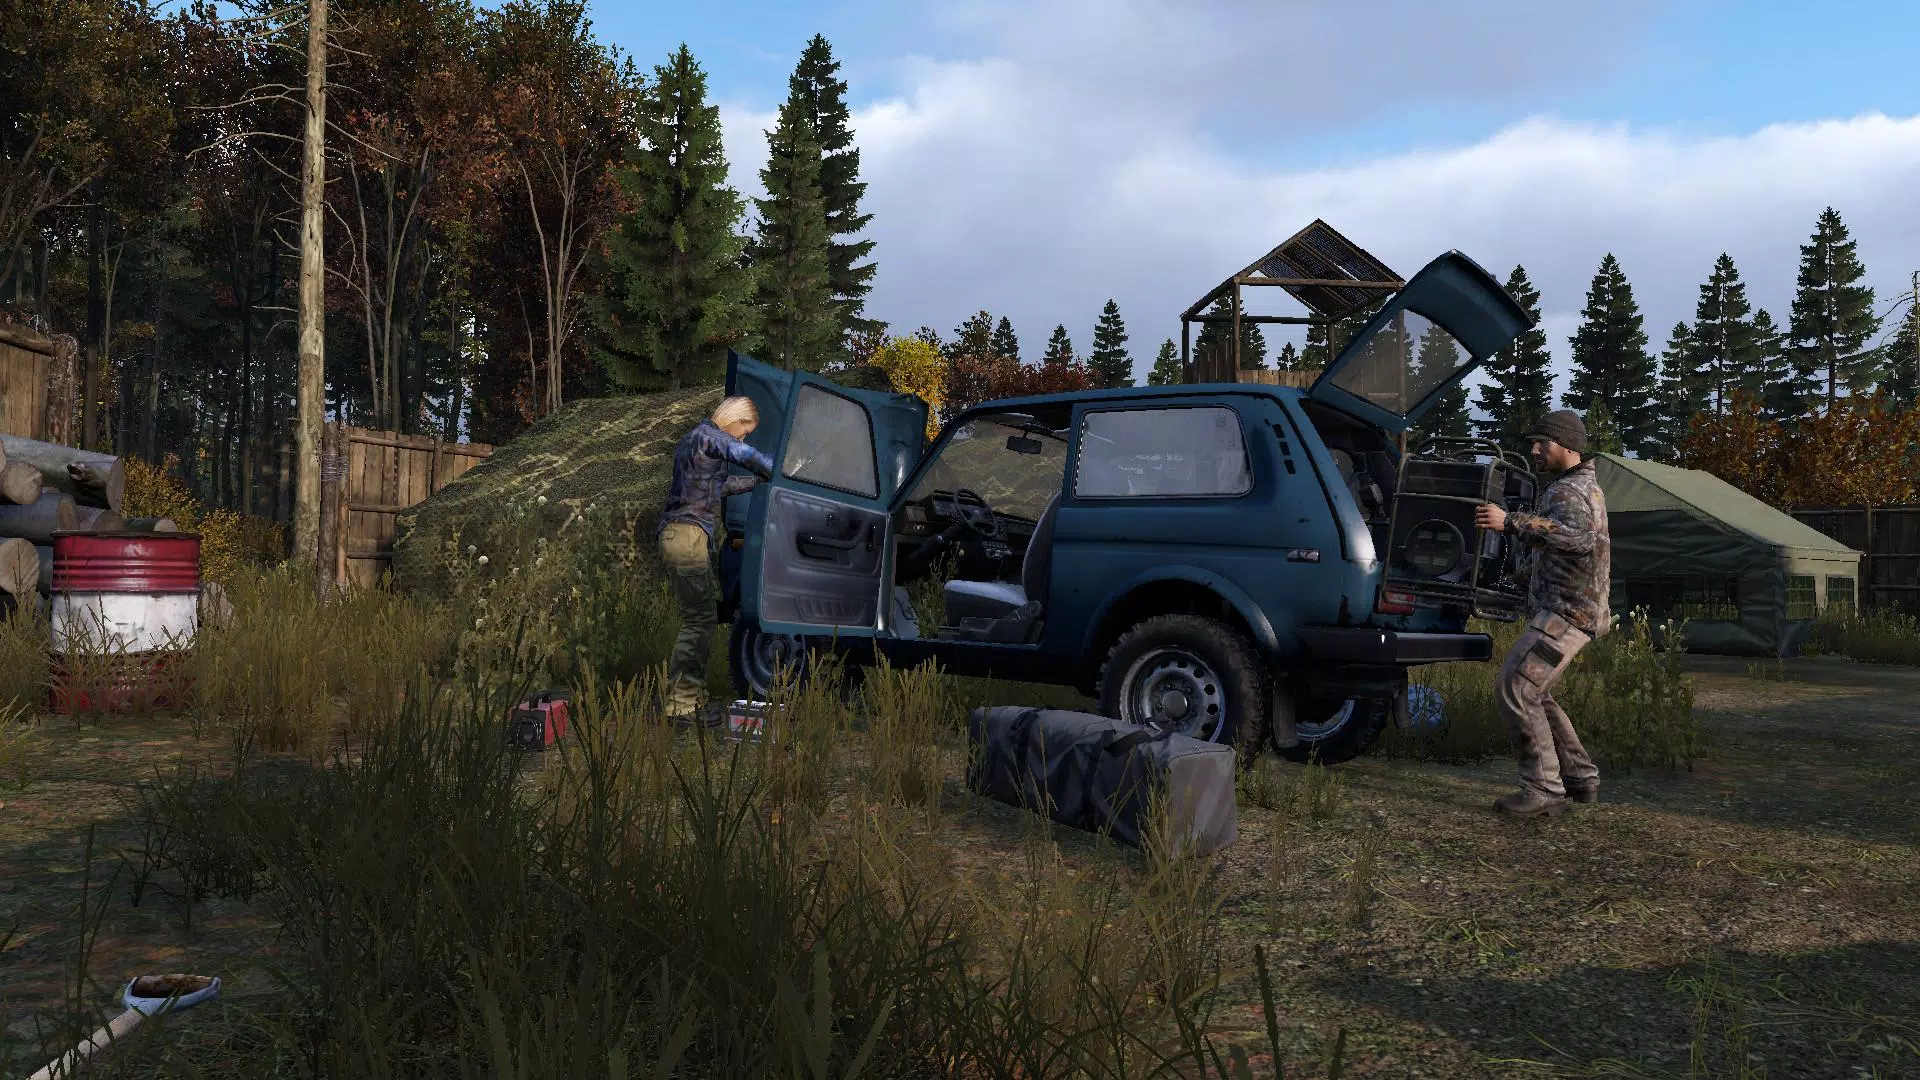 DayZ Mobile APK (Android Game) - Free Download